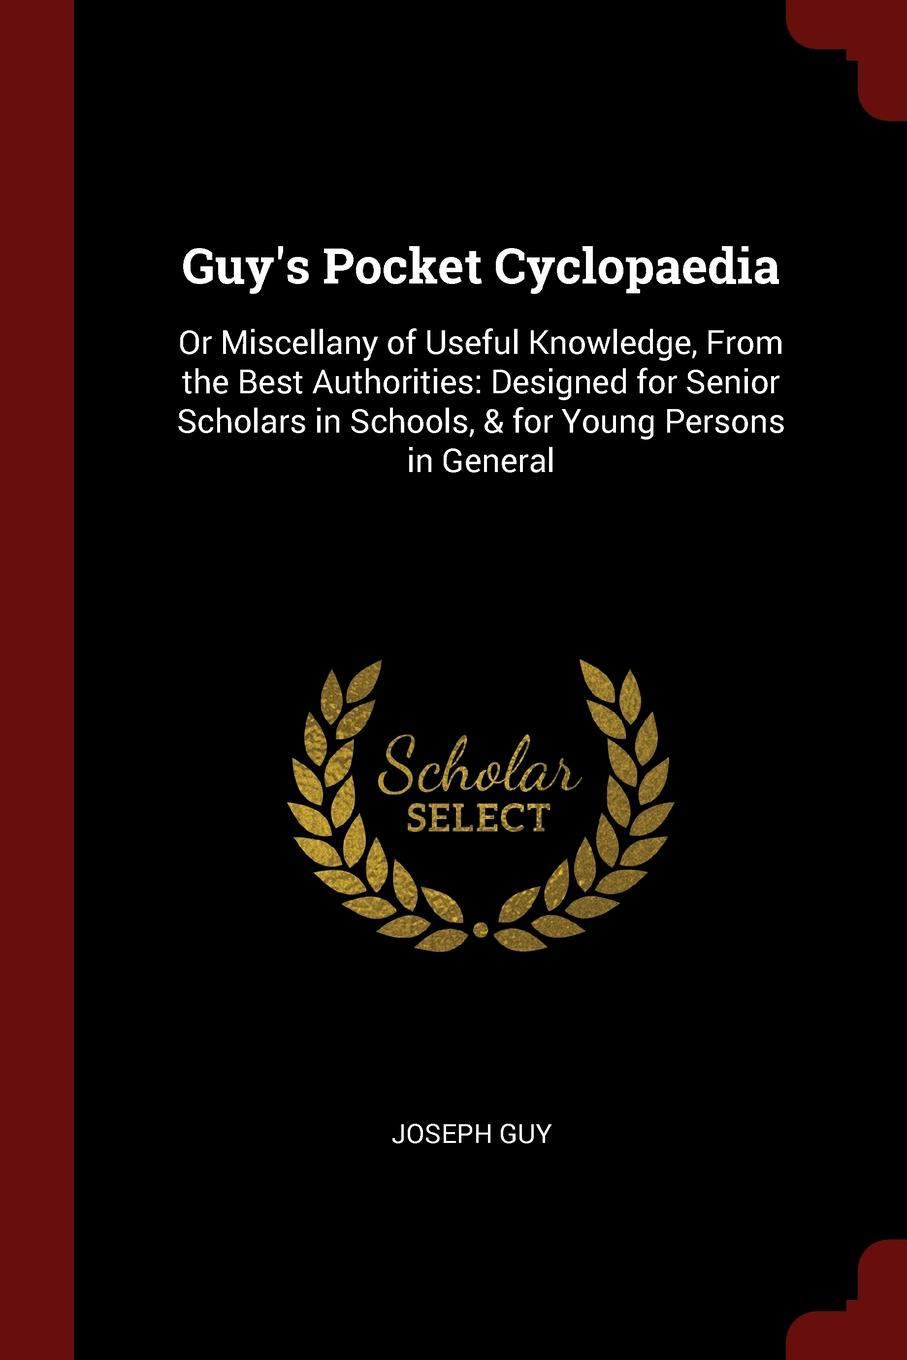 Guy.s Pocket Cyclopaedia. Or Miscellany of Useful Knowledge, From the Best Authorities: Designed for Senior Scholars in Schools, . for Young Persons in General